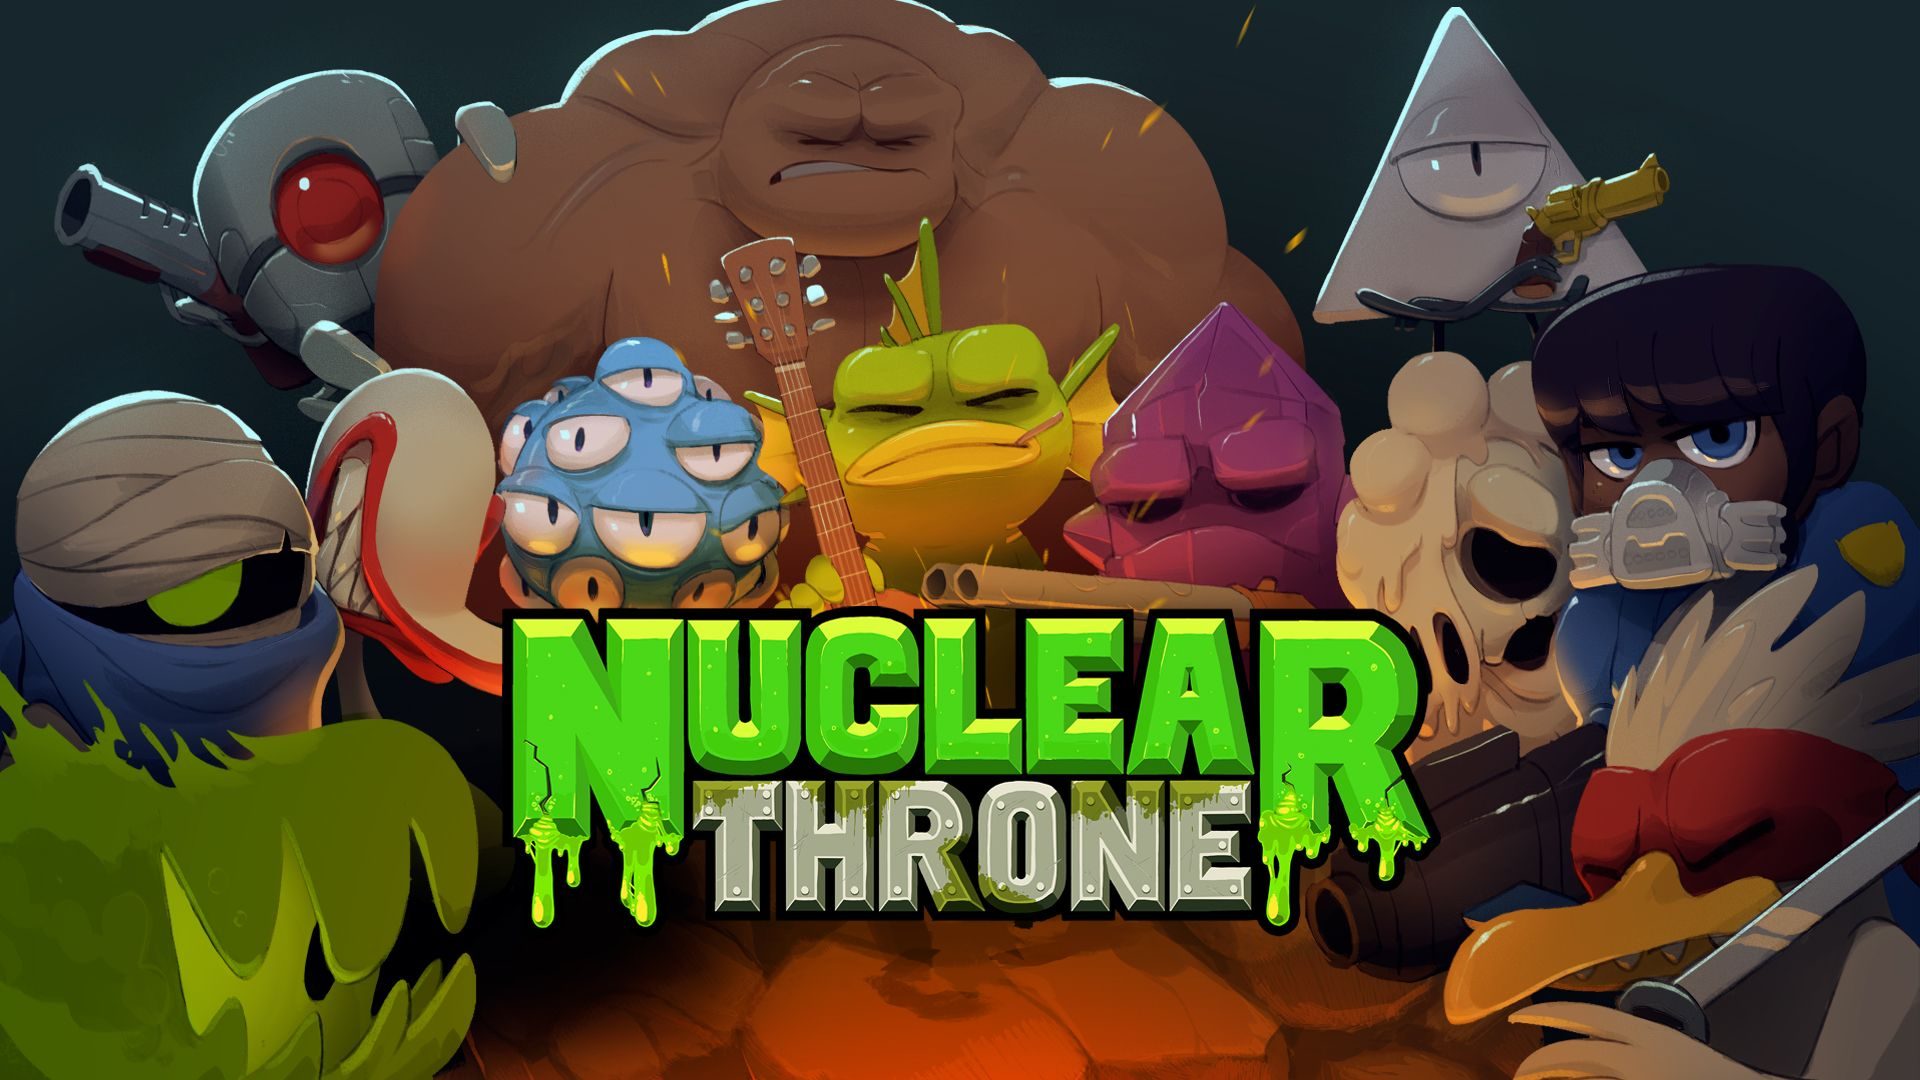 nuclear-throne-switch-hero-7153774